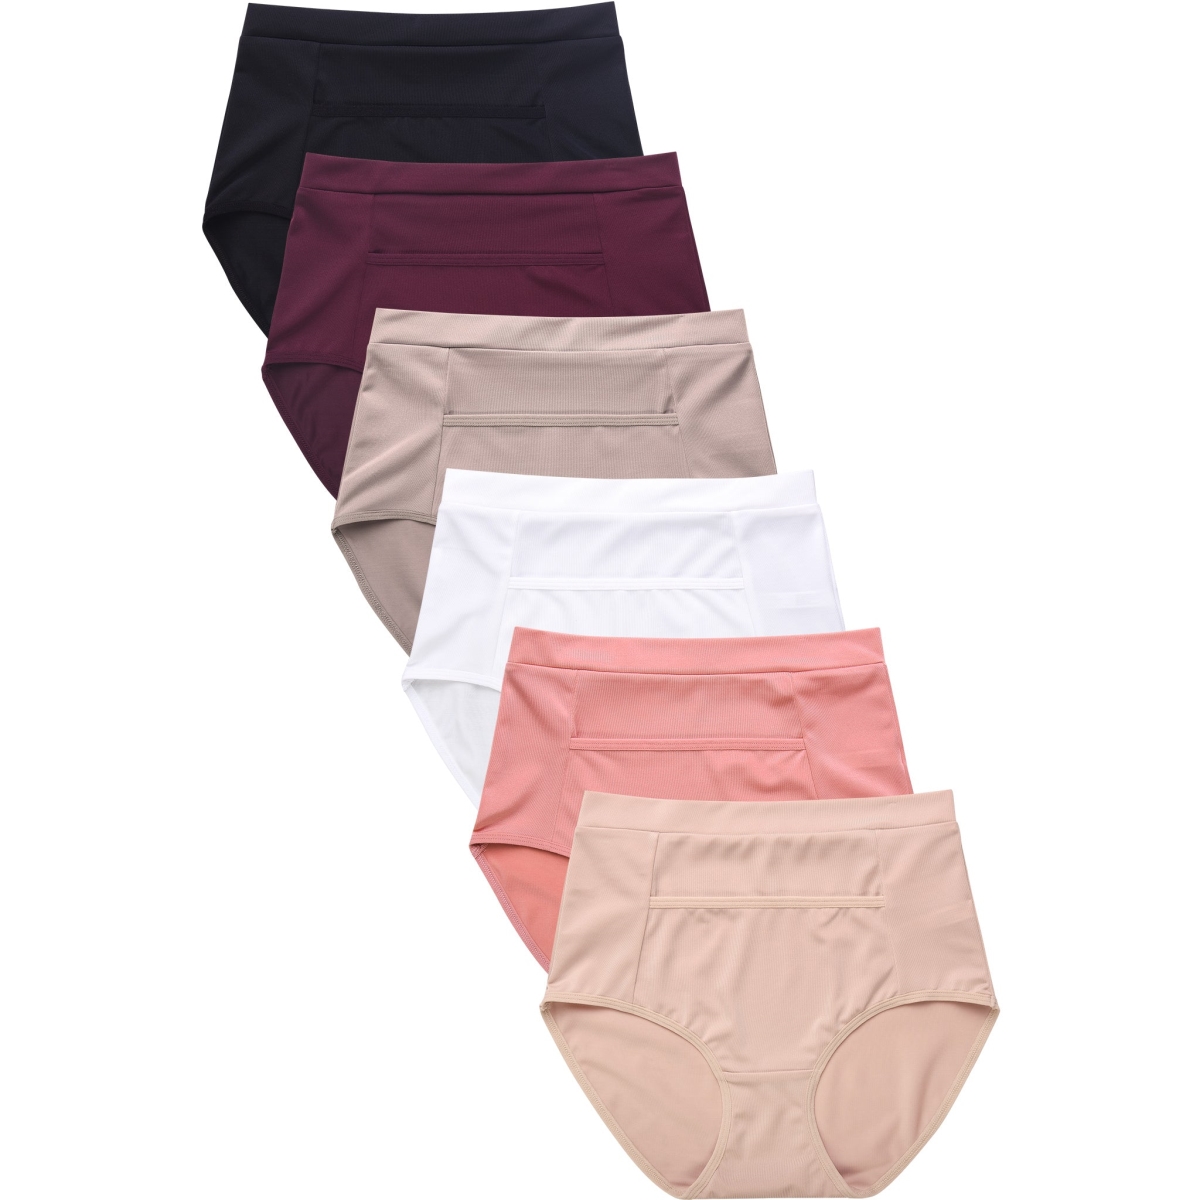 Picture of 247 Frenzy 247-GL7180-SM Sofra Womens Essentials Shapewear Control Panty Underwear - Assorted Color - Small - Pack of 6